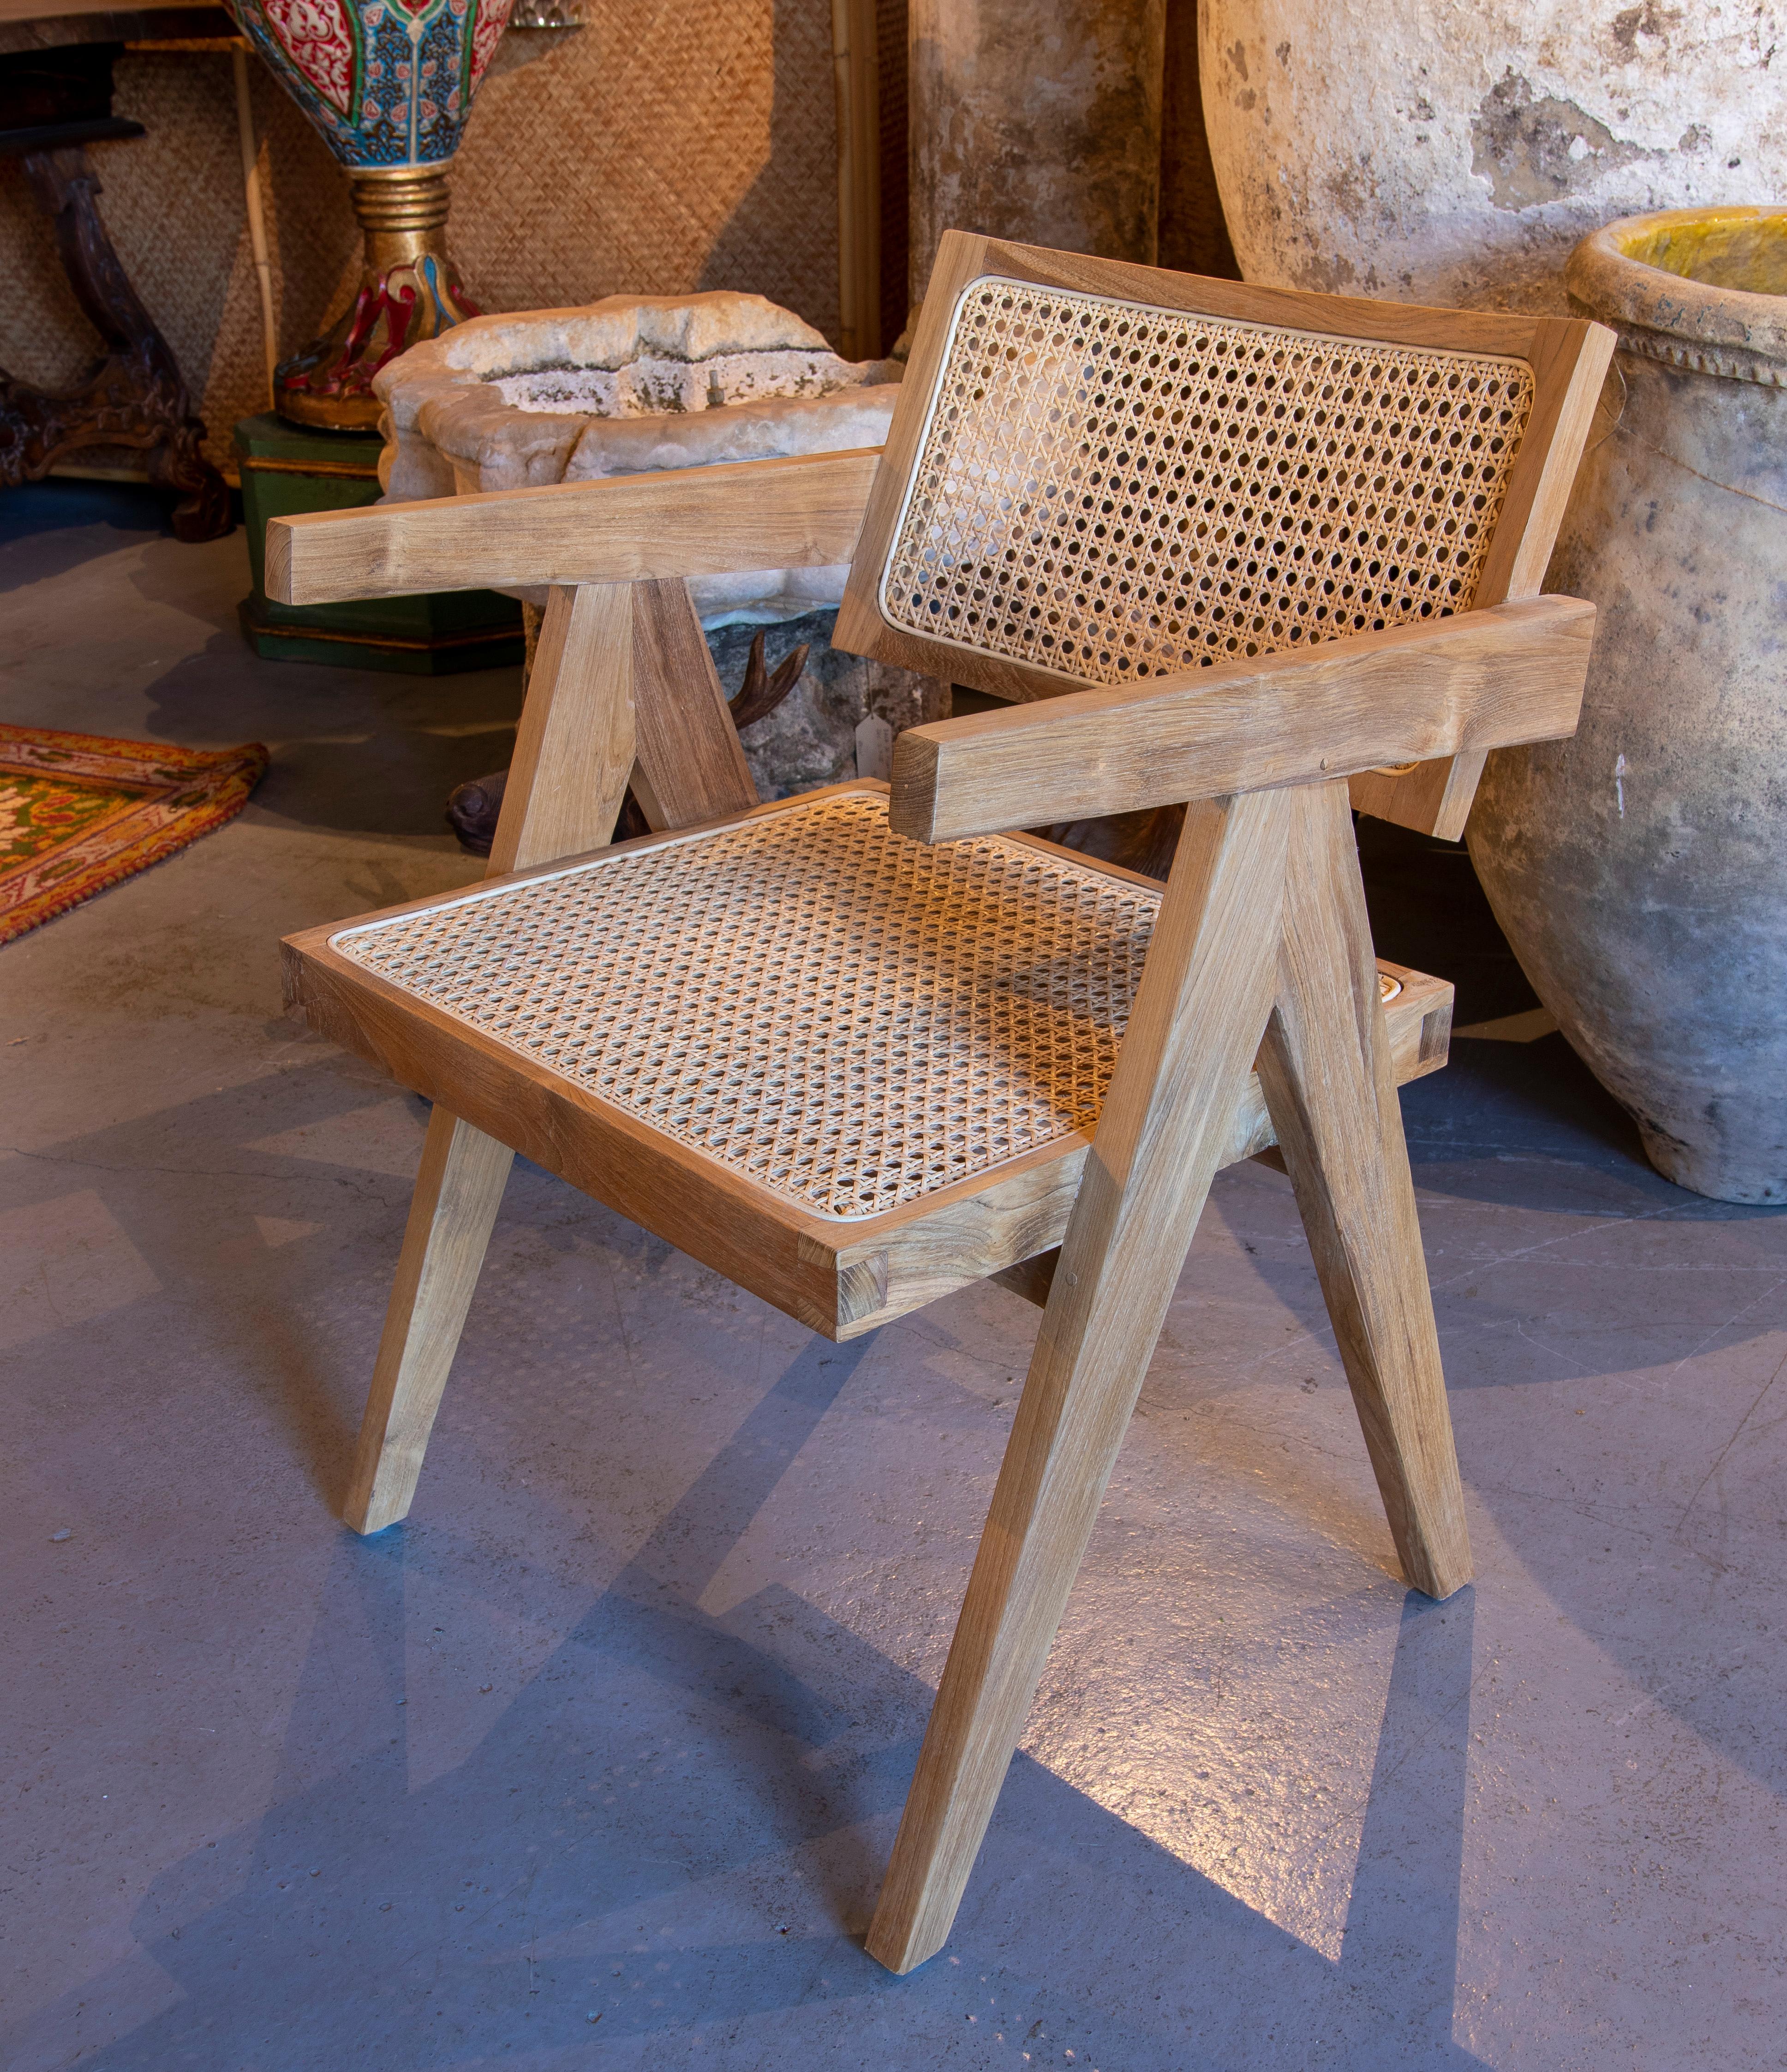 Contemporary Set of Wooden Chairs and Seat with Wicker Backrest